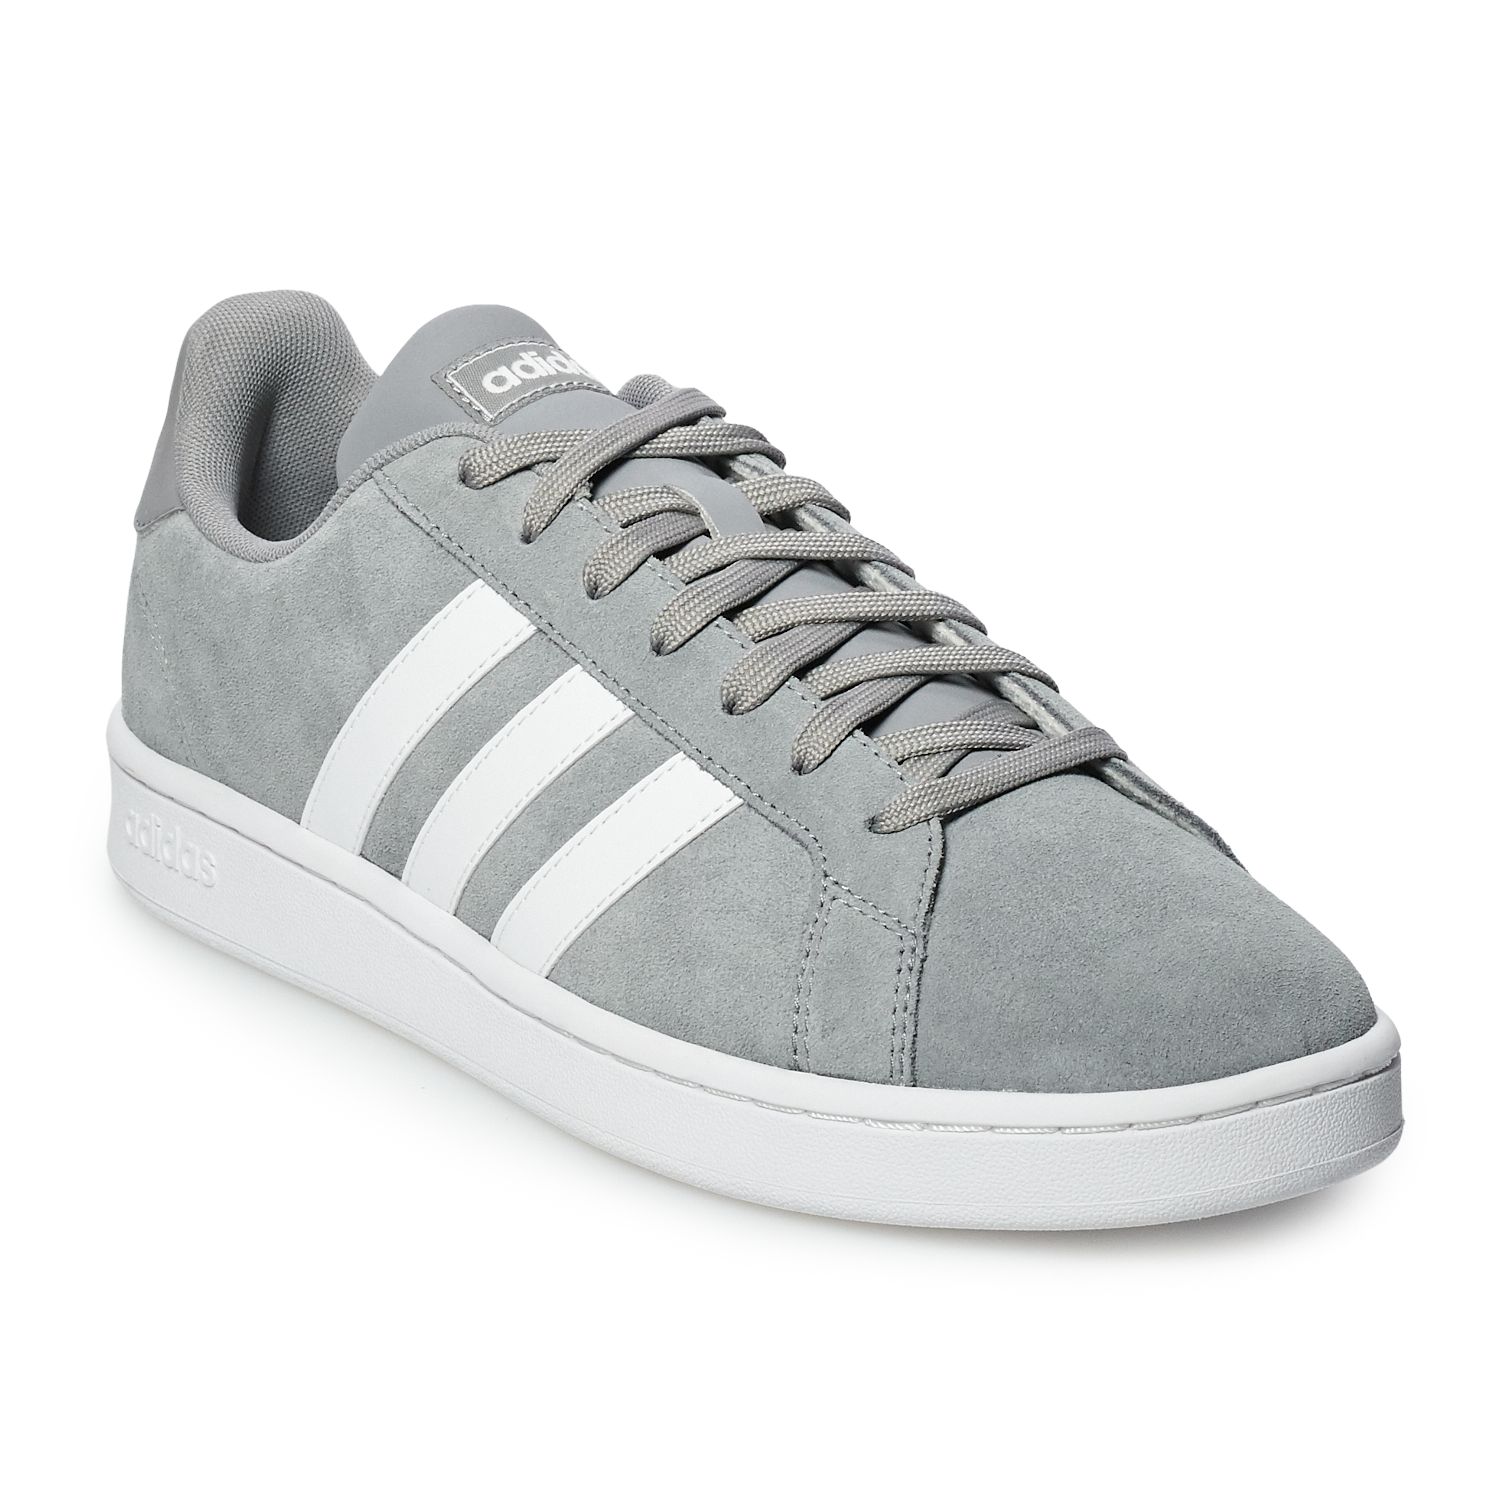 adidas grand court suede sneaker